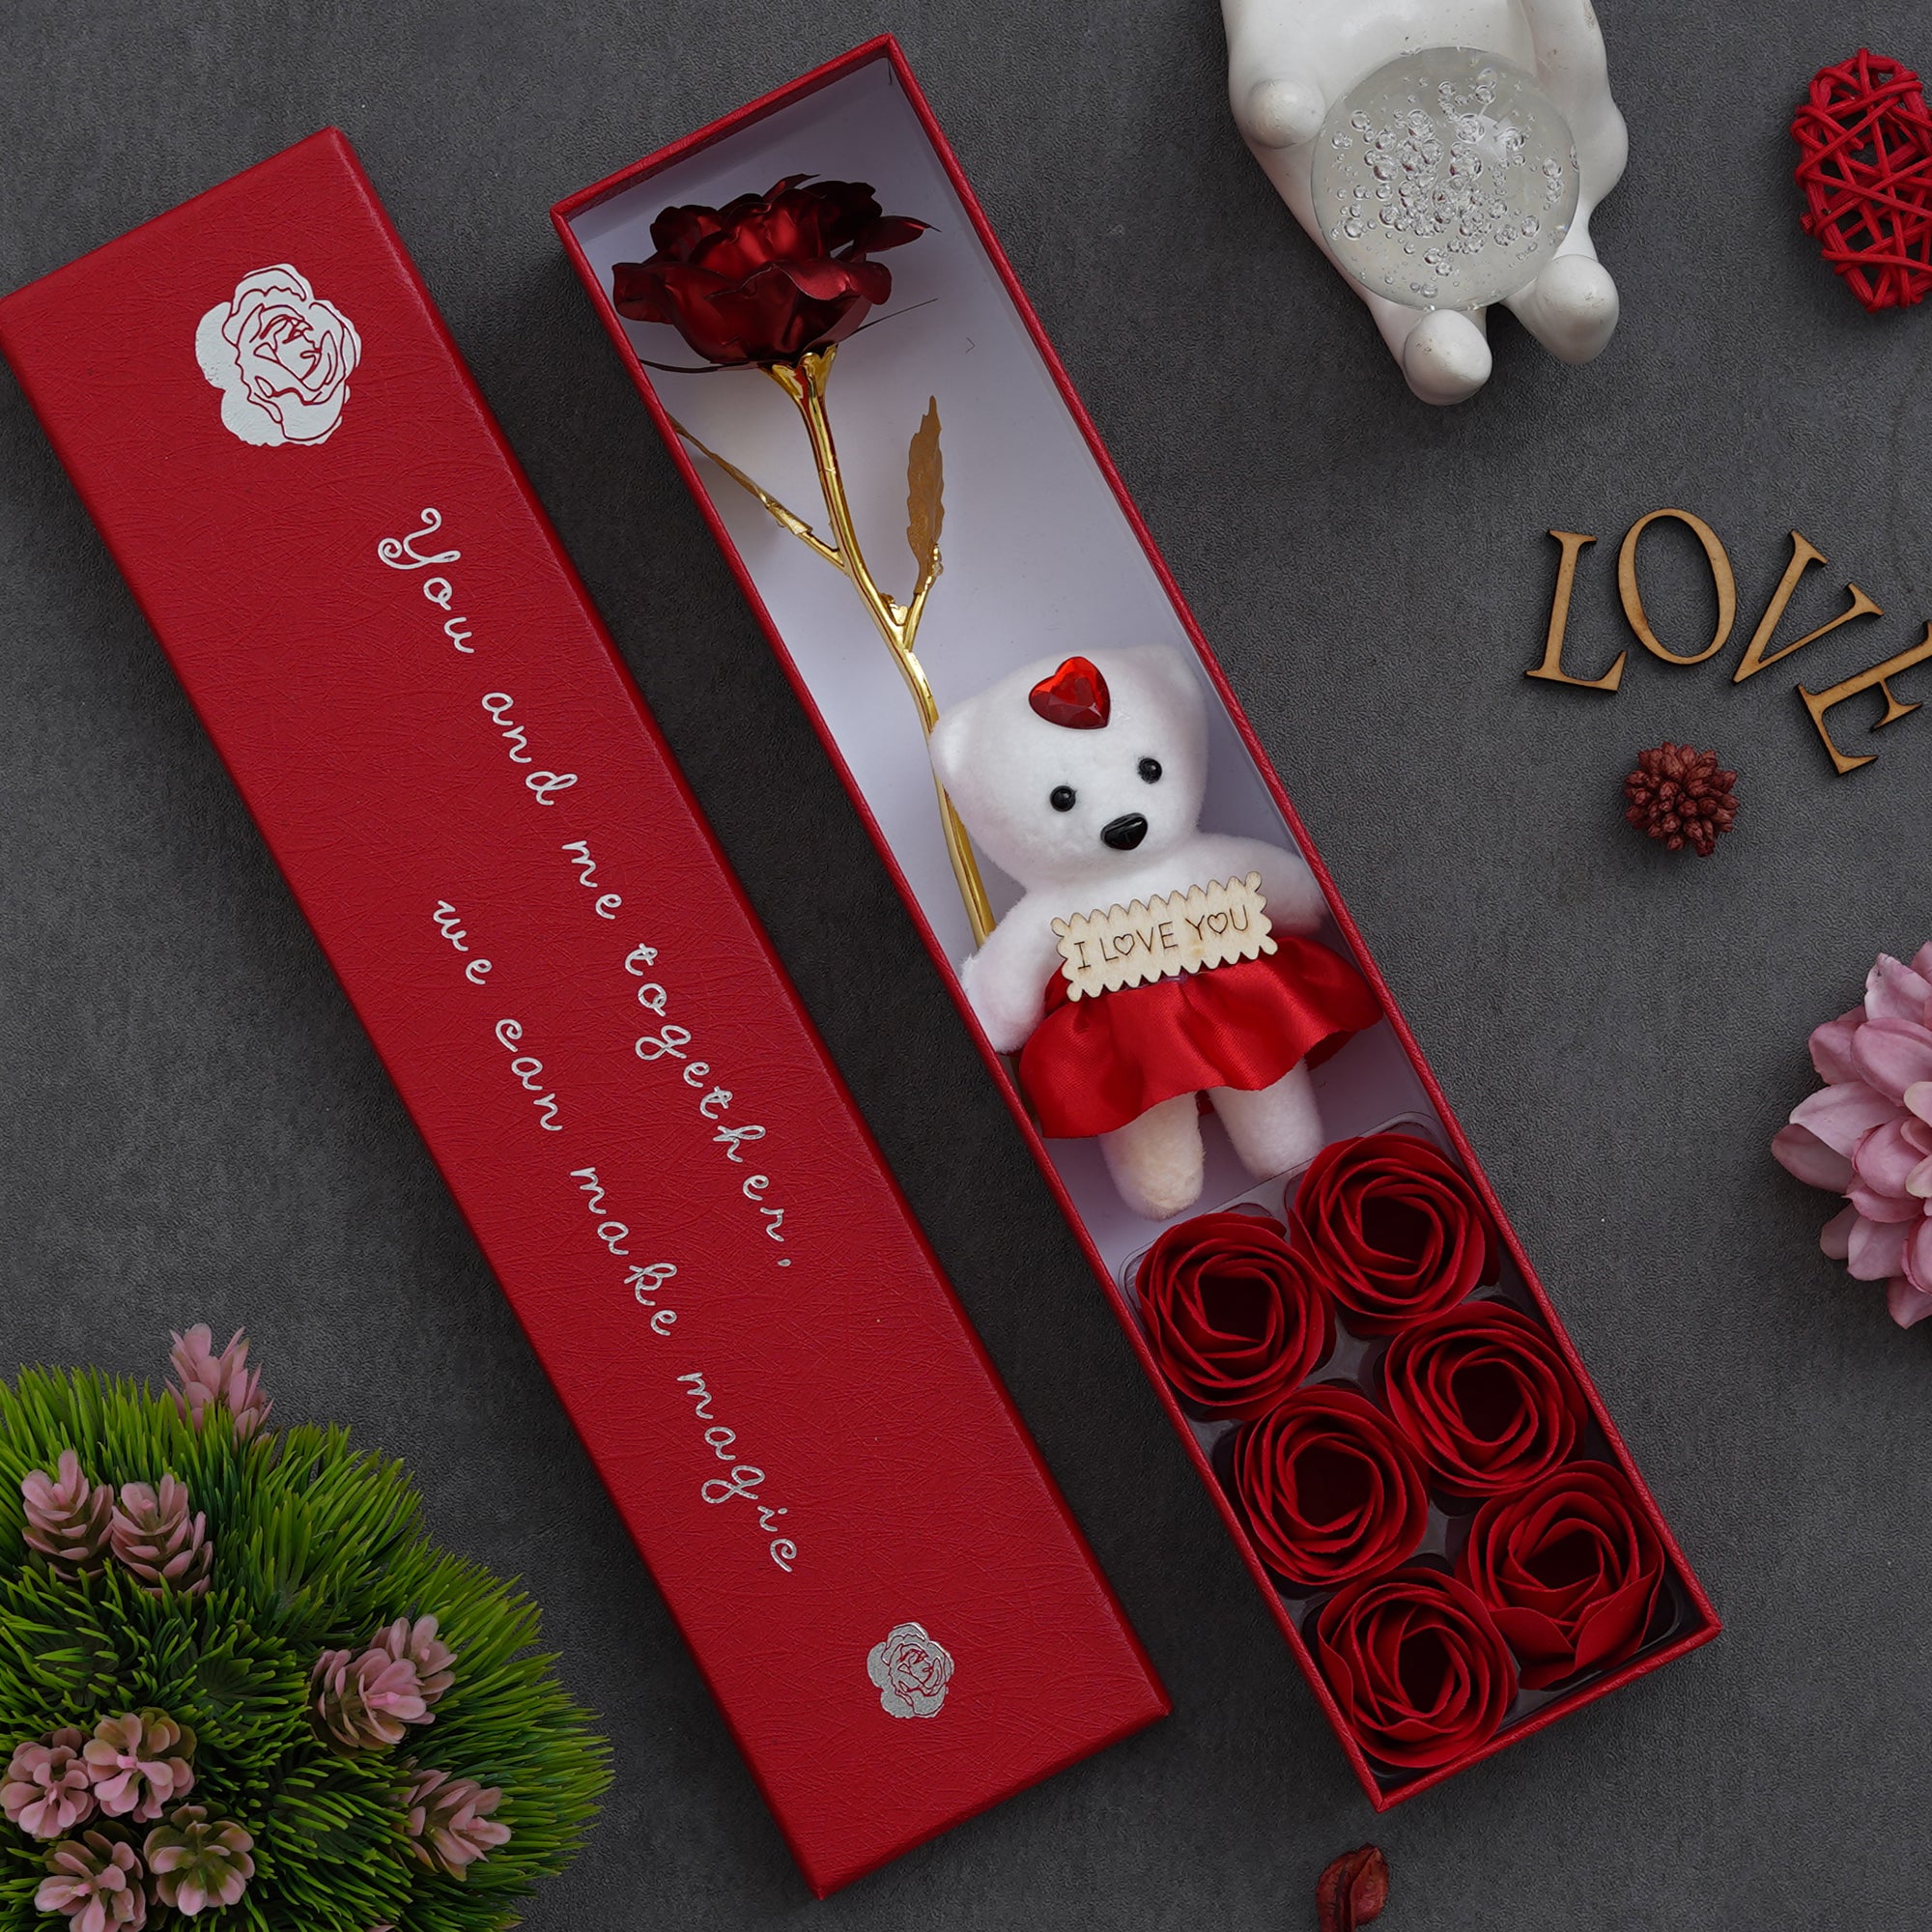 Red Valentine Gift Box with Teddy, Red Flower and 6 Roses